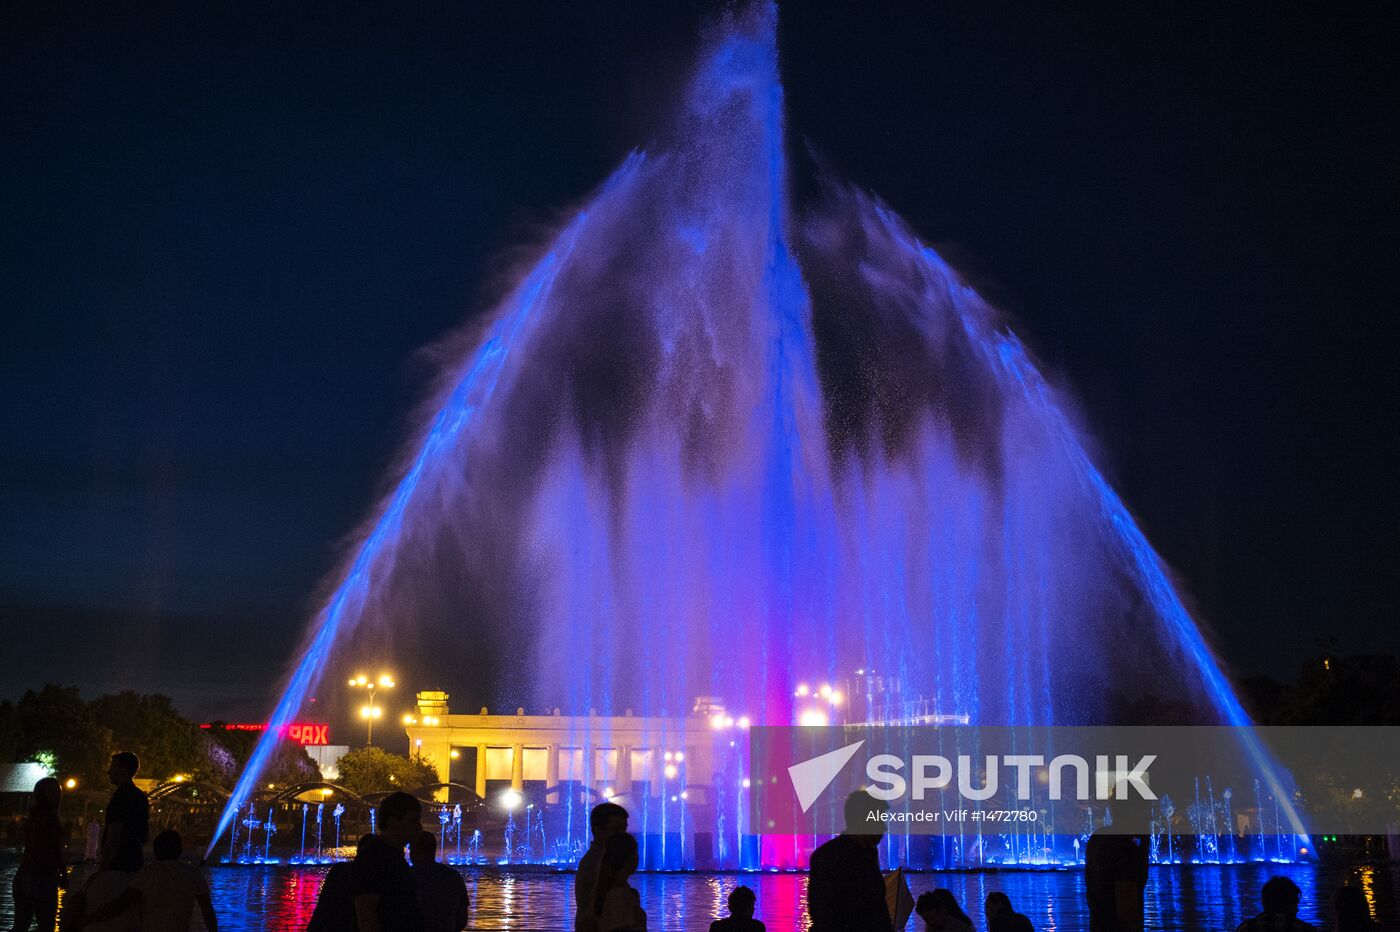 Singing fountains in Moscow's Gorky Park